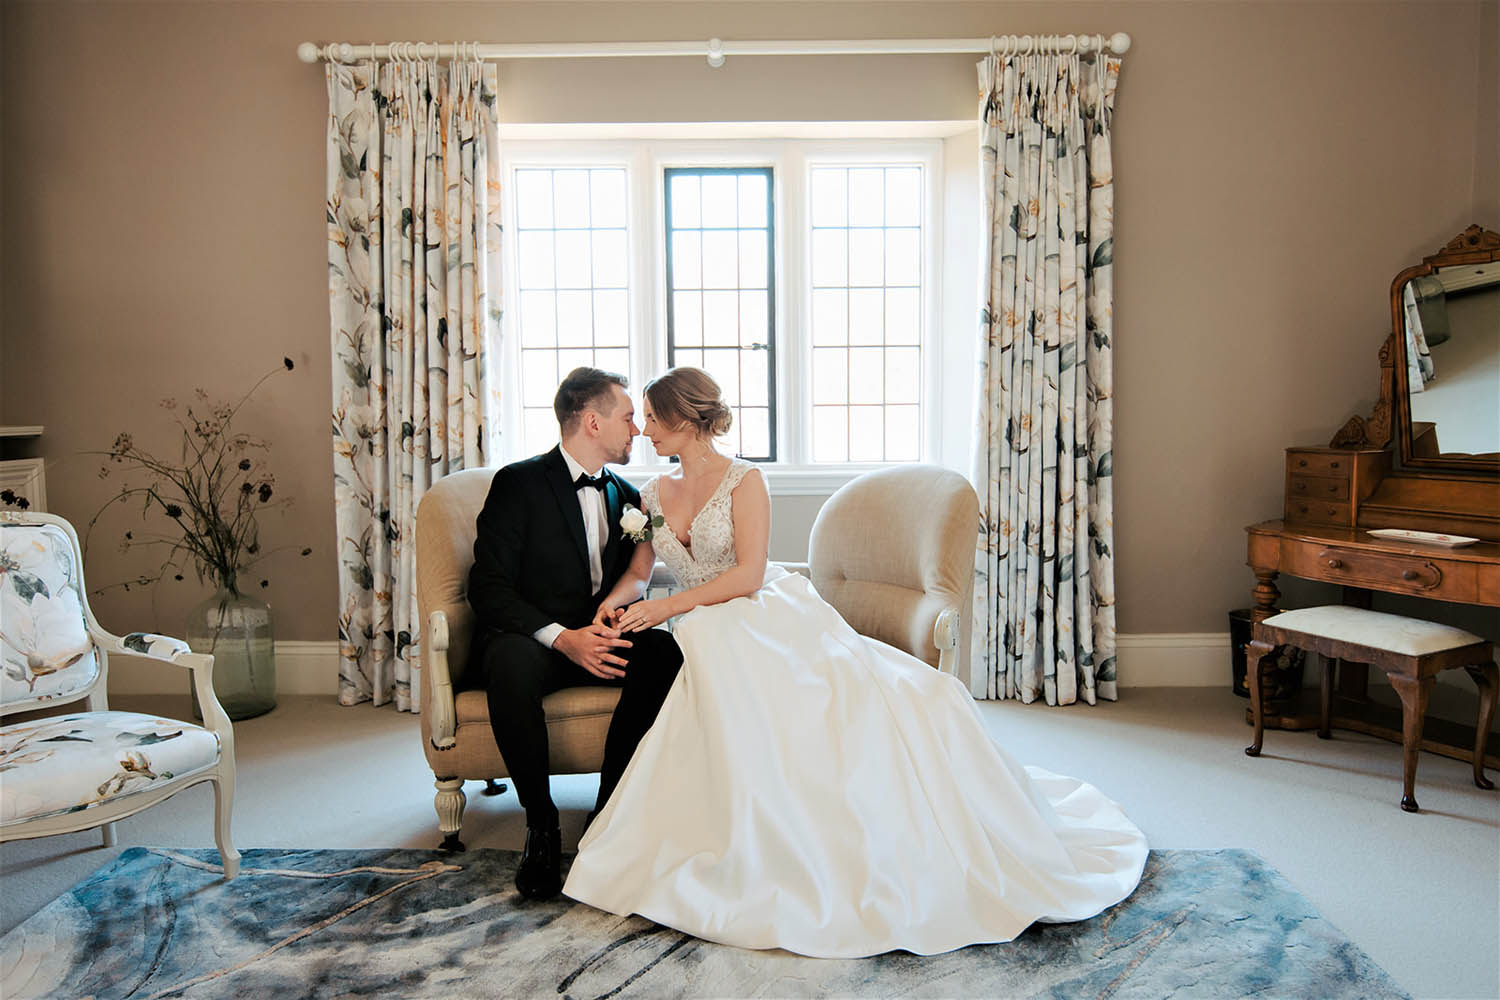 Romantic wedding image of a bride and groom sat on an elegant chair before a bright window.